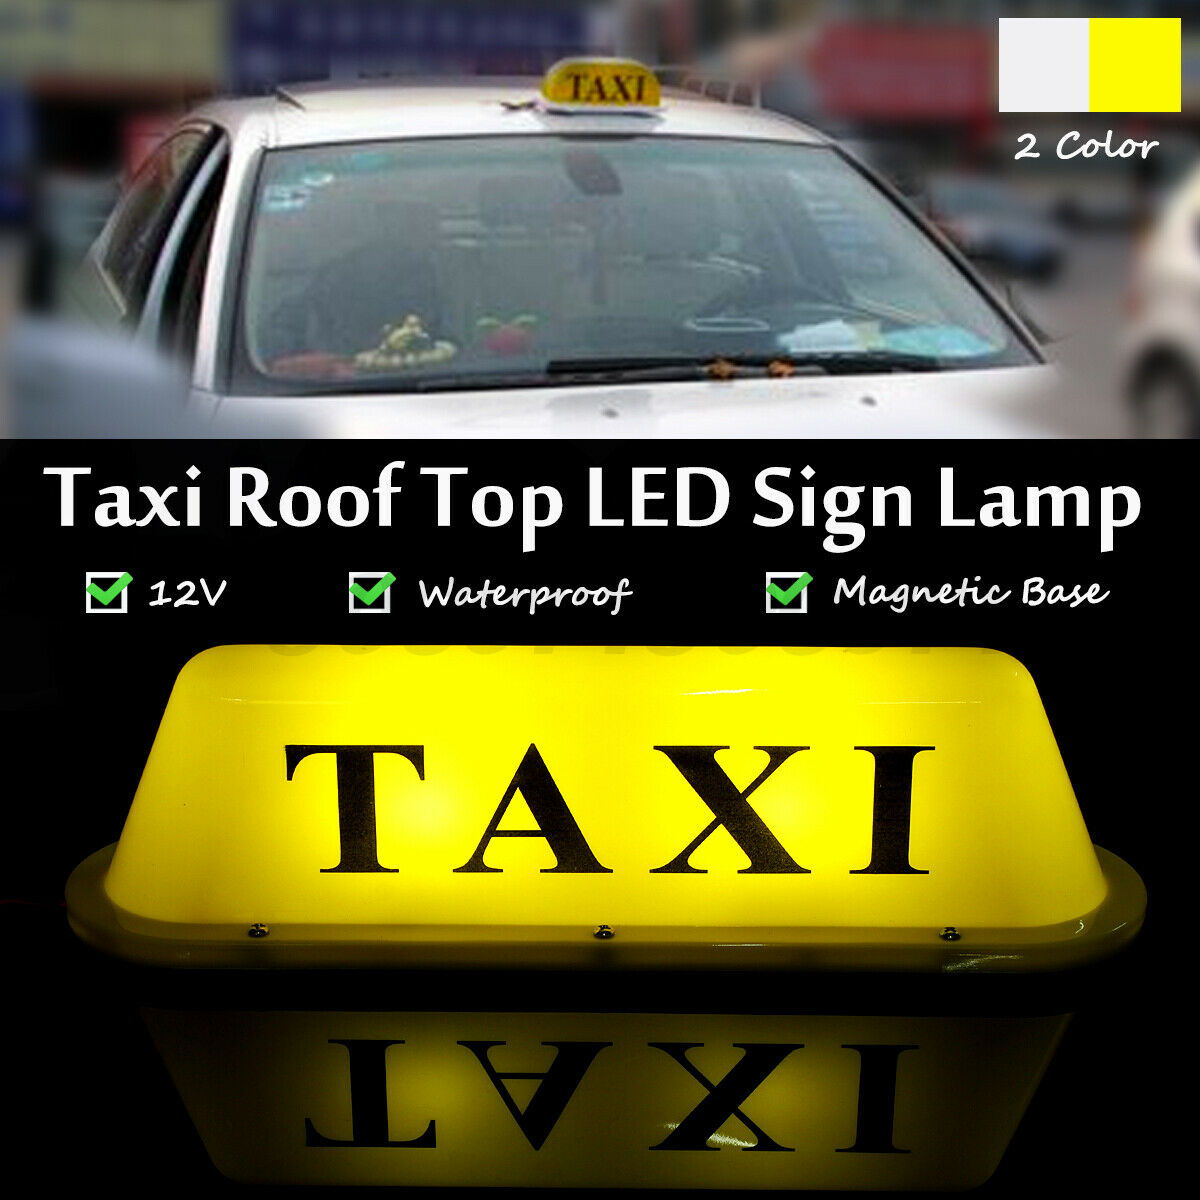 LED Car Taxi Meter Cab Roof Top Sign Light Lamp Magnetic Magnet Yellow for Taxi Drivers Box HOT SALE